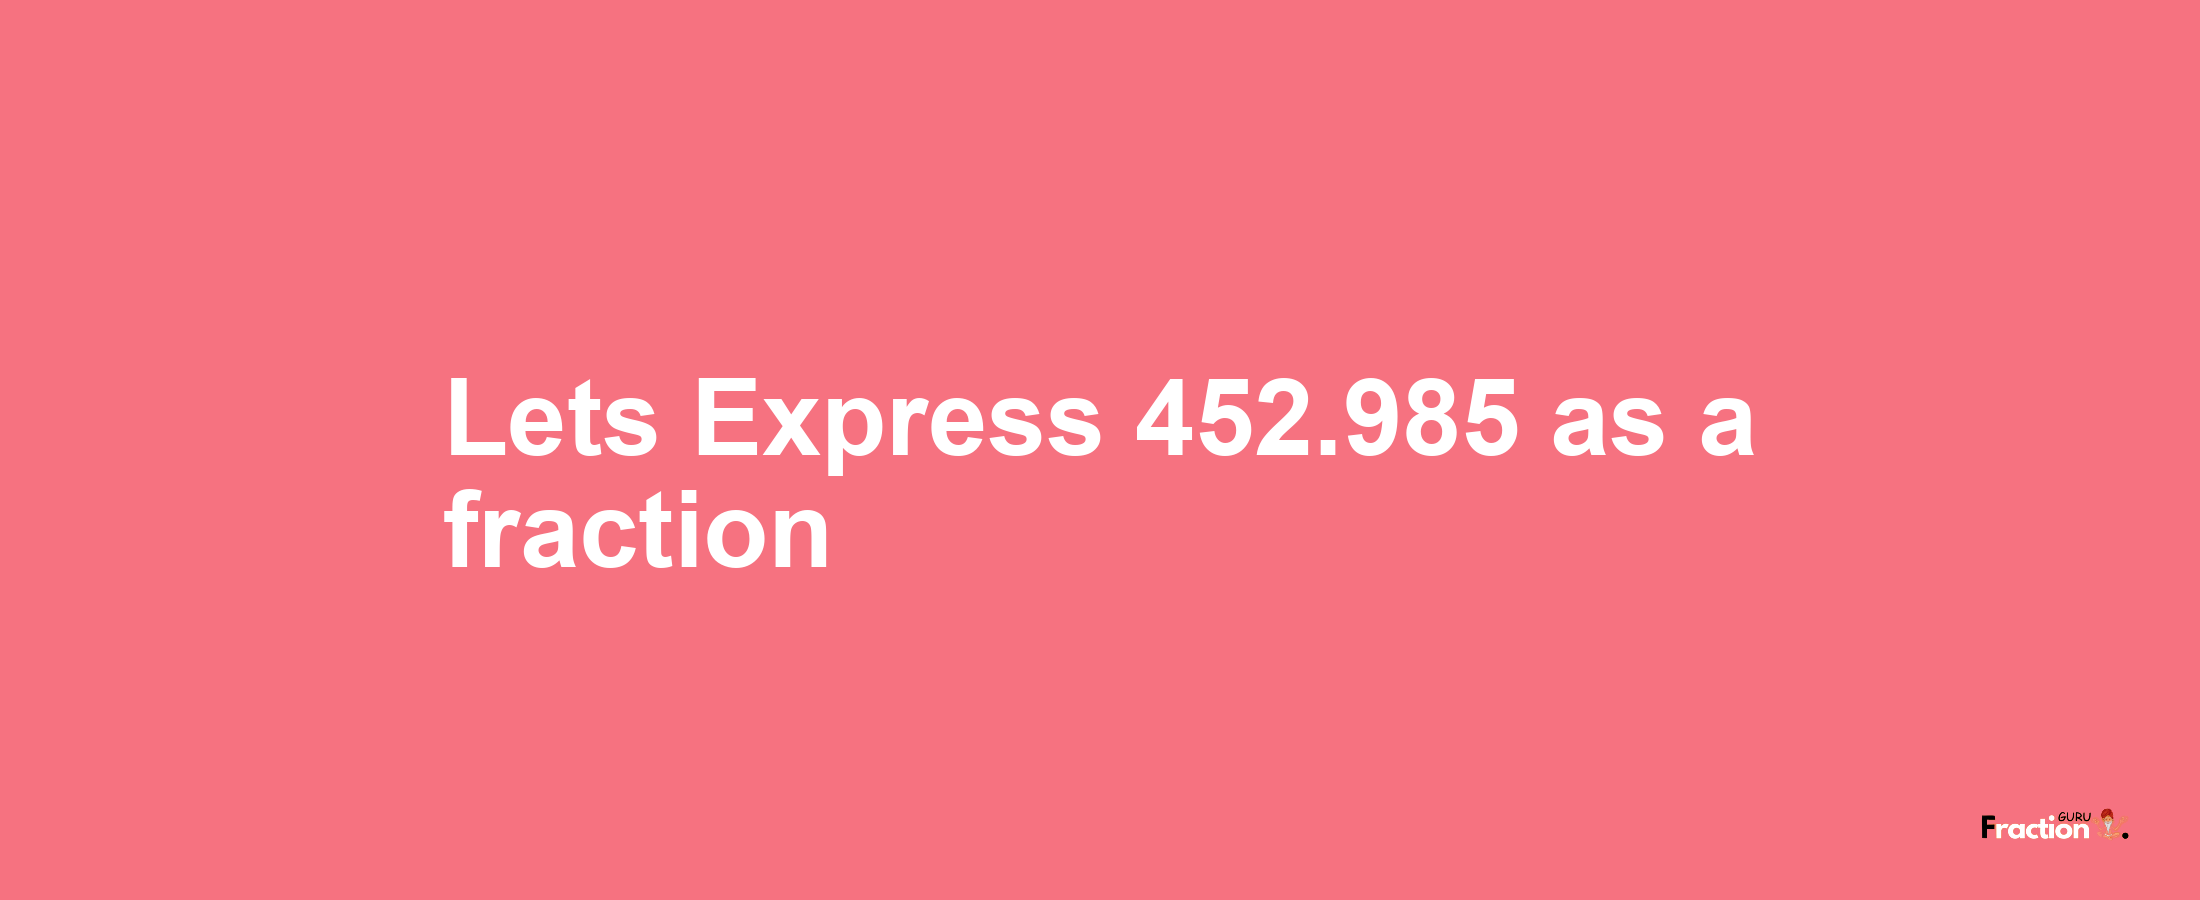 Lets Express 452.985 as afraction